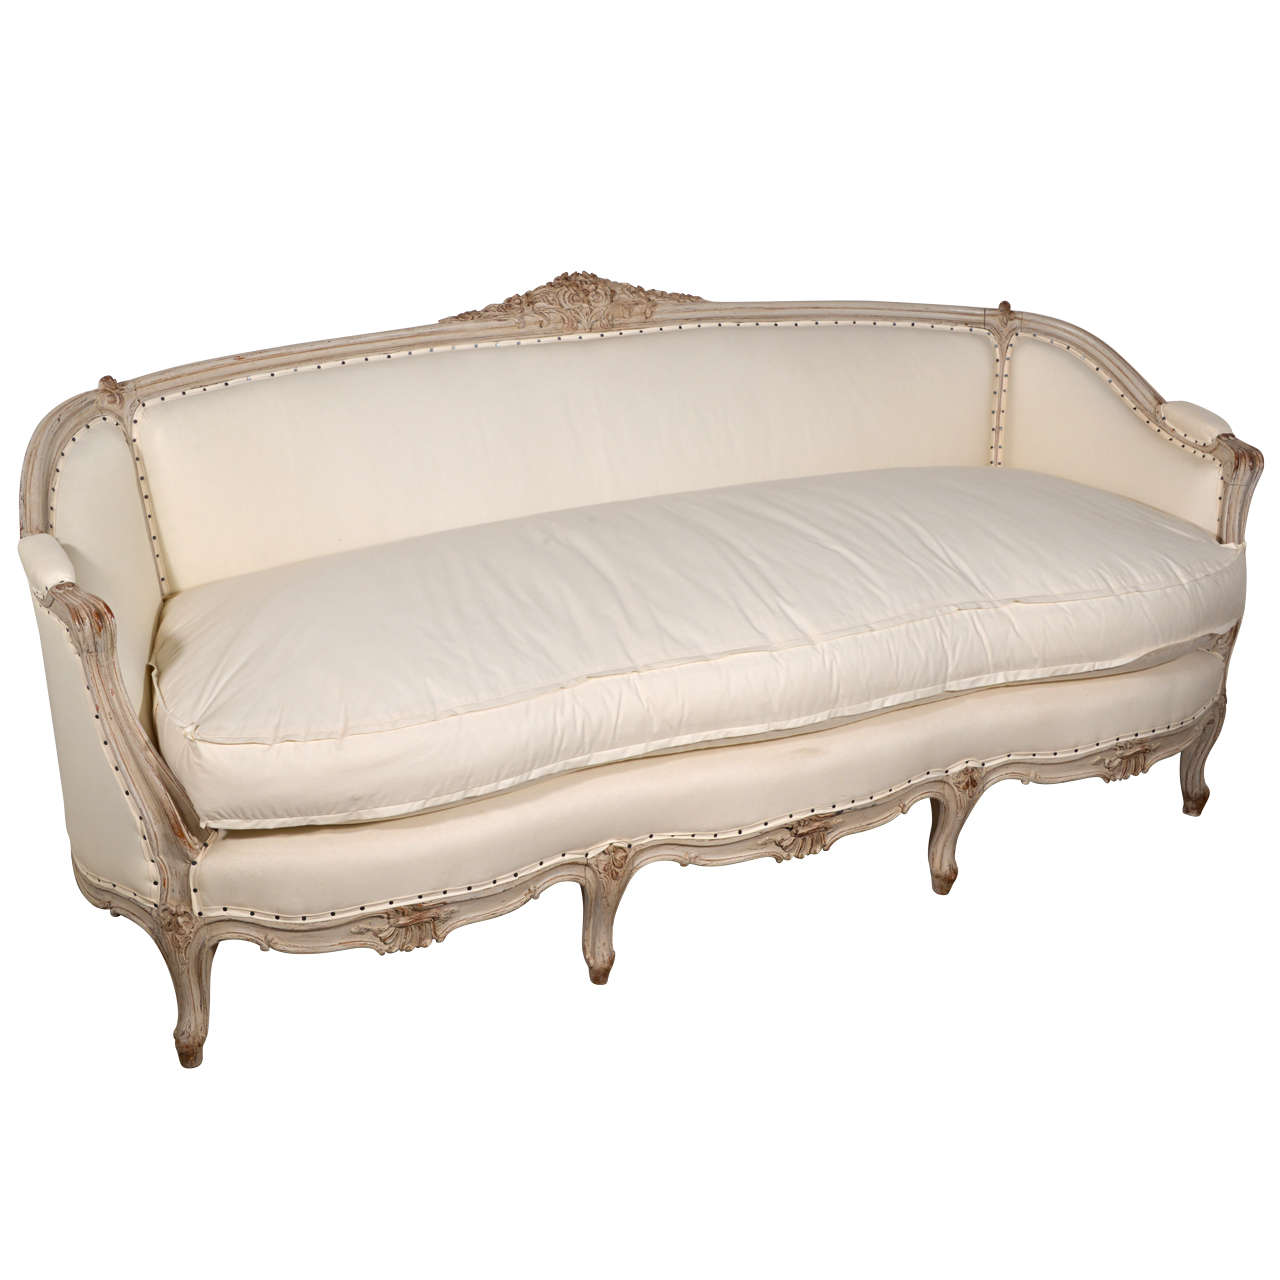 19th century Swedish canapé sofa: beautifully carved, gray painted sofa adorned with exceptional foliate motif decoration. Newly upholstered with down-wrap cushion.

Note: Regional differences in humidity and climate during shipping may cause